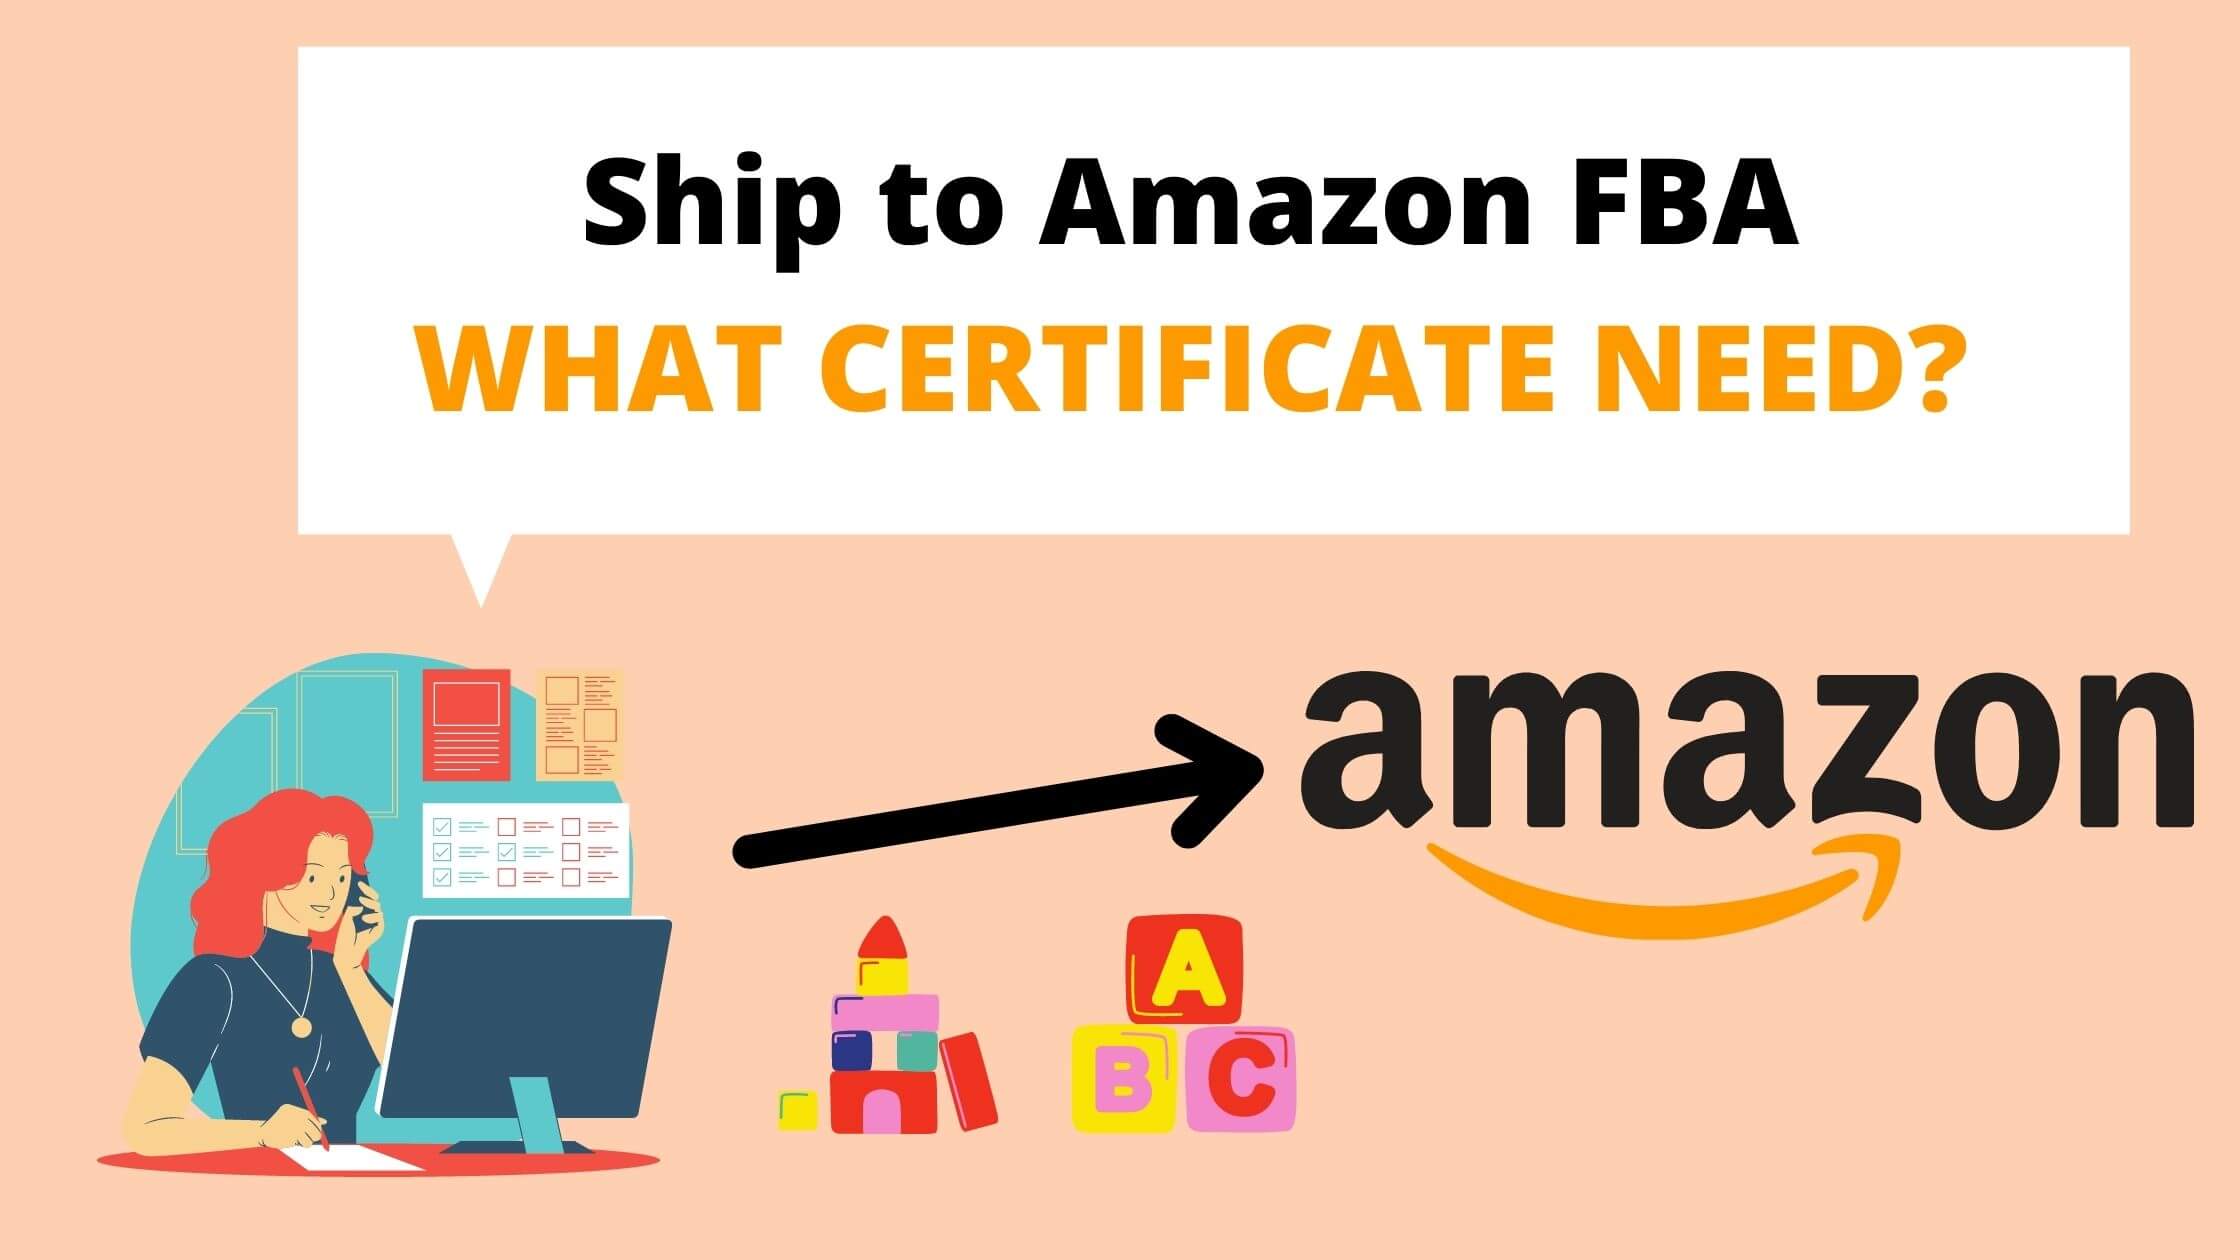 Ship to Amazon FBA WHAT CERTIFICATE NEED